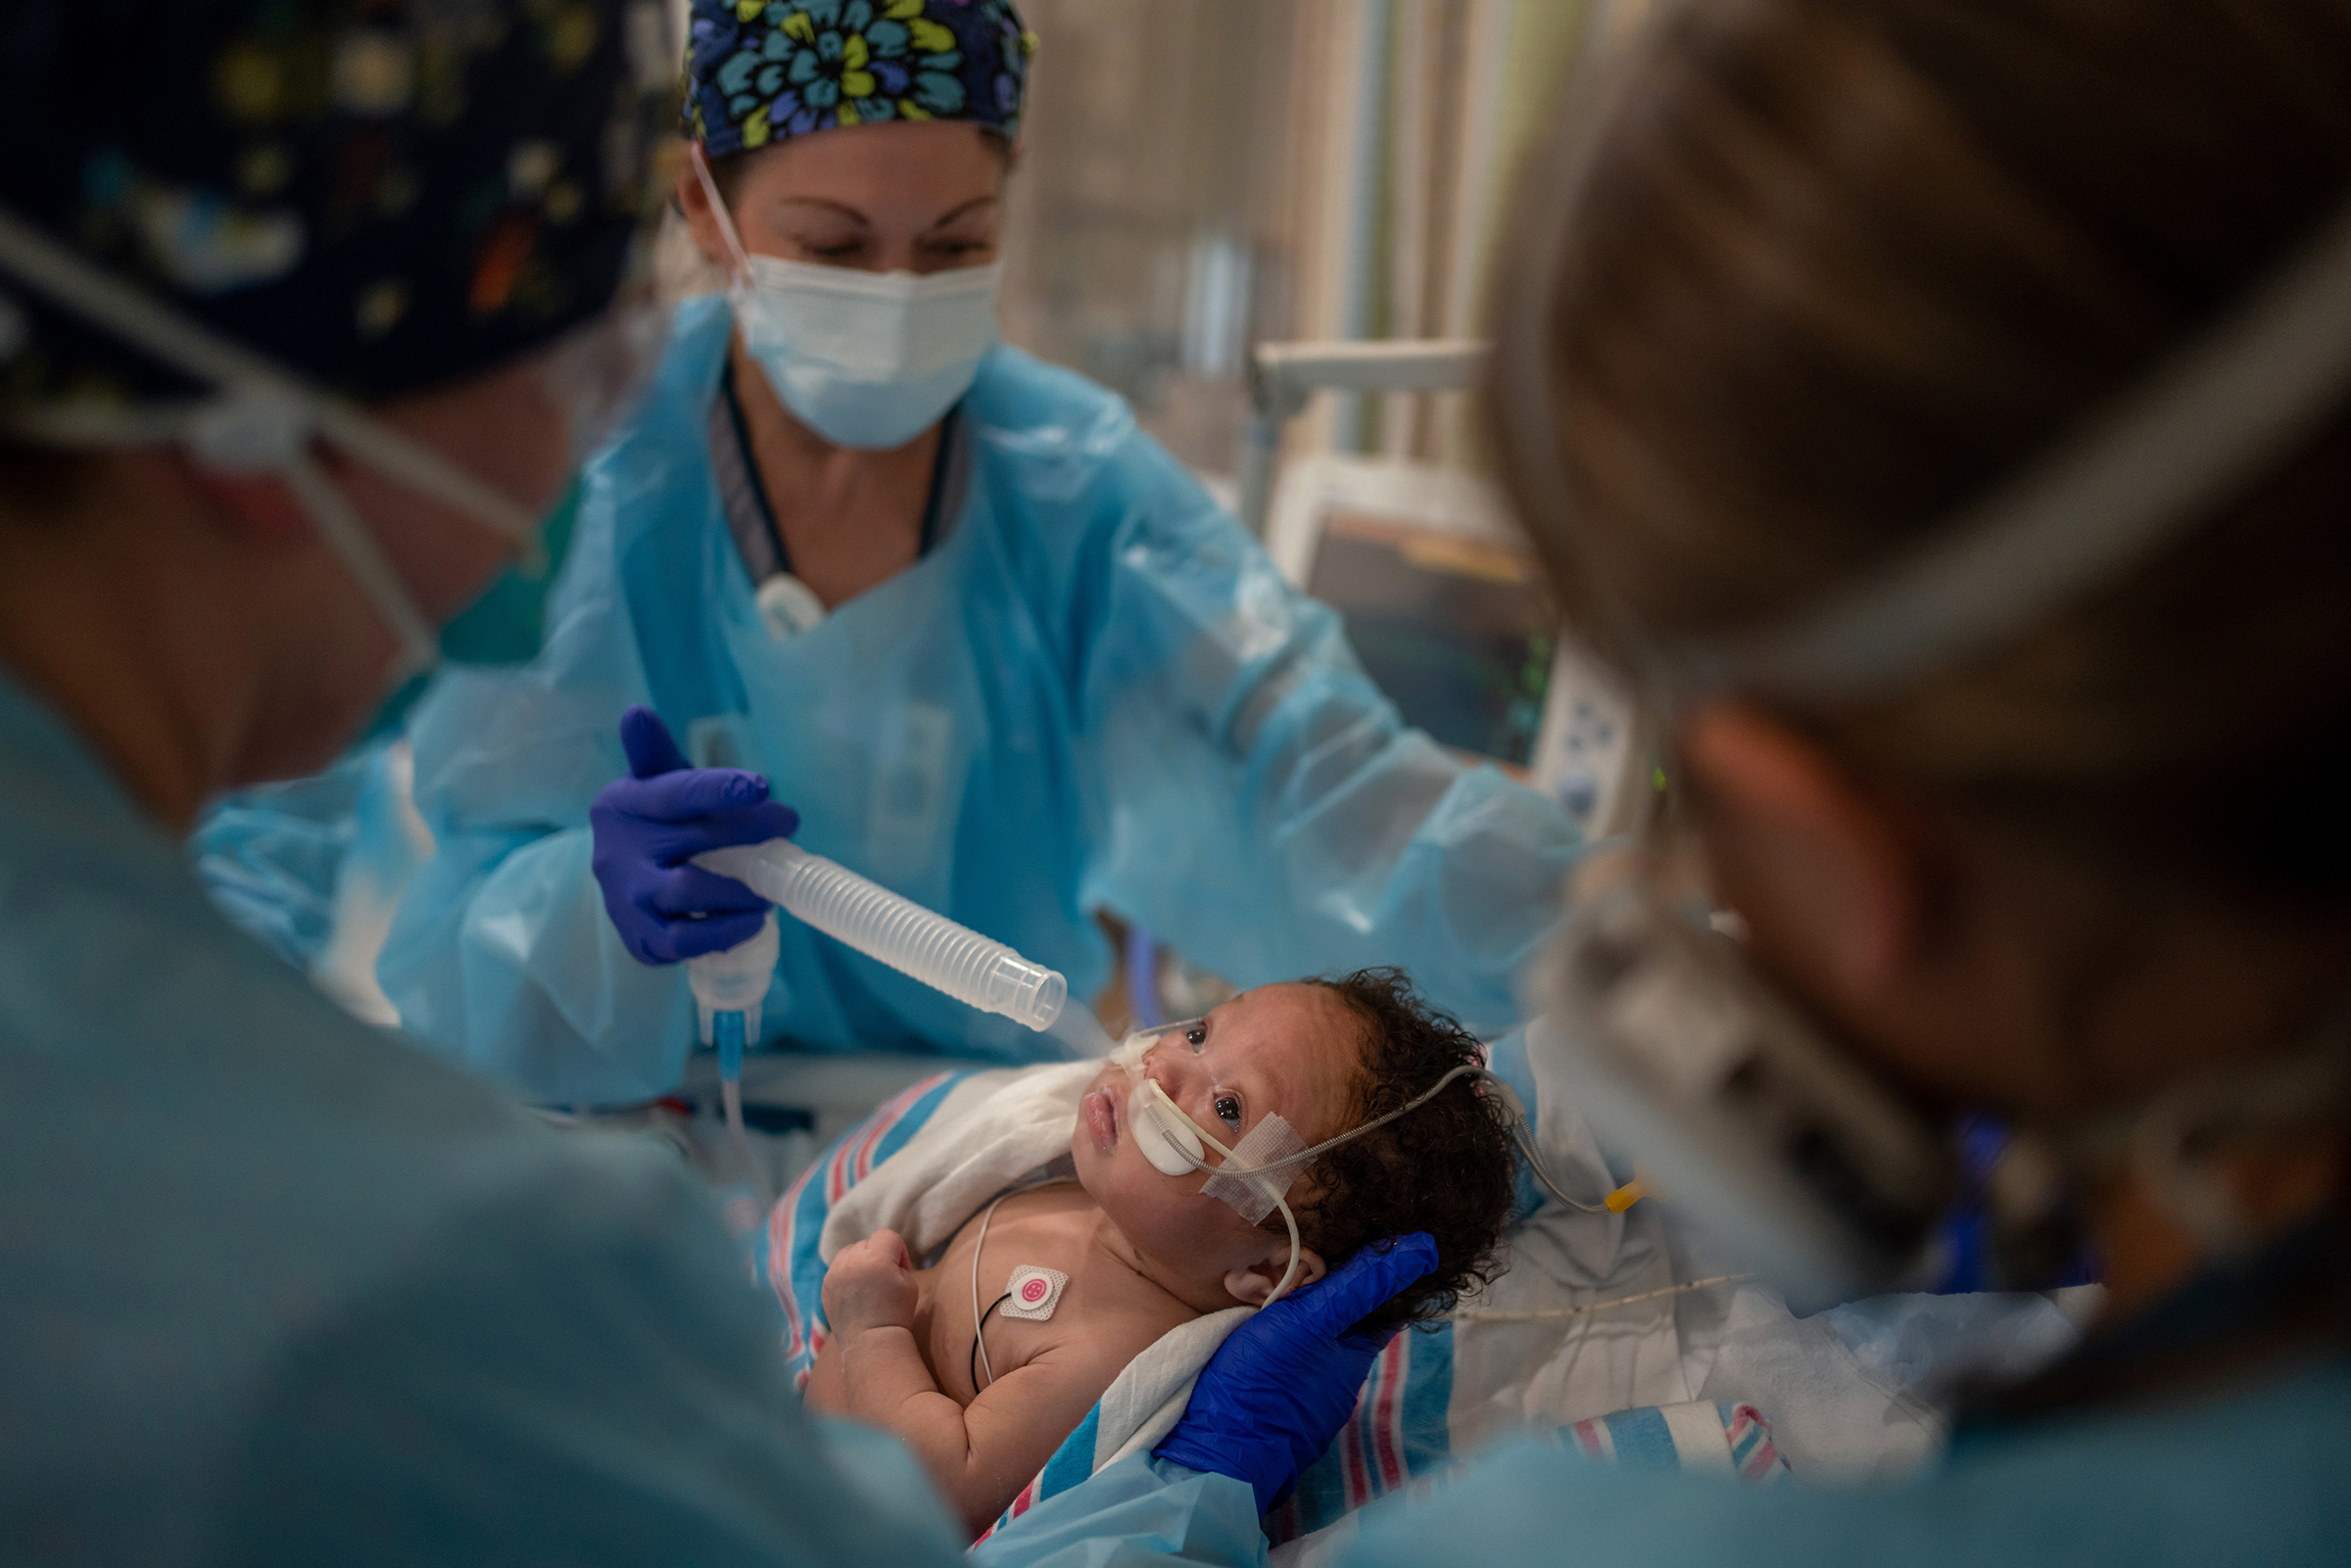 Respiratory therapist Diane Gelpi administers oxygen to two-month-old Carvase Perrilloux after he was <a href="https://time.com/6092446/pediatric-covid-19-surge/">taken off a ventilator</a> at Children’s Hospital New Orleans on Aug. 20. (Kathleen Flynn for TIME)